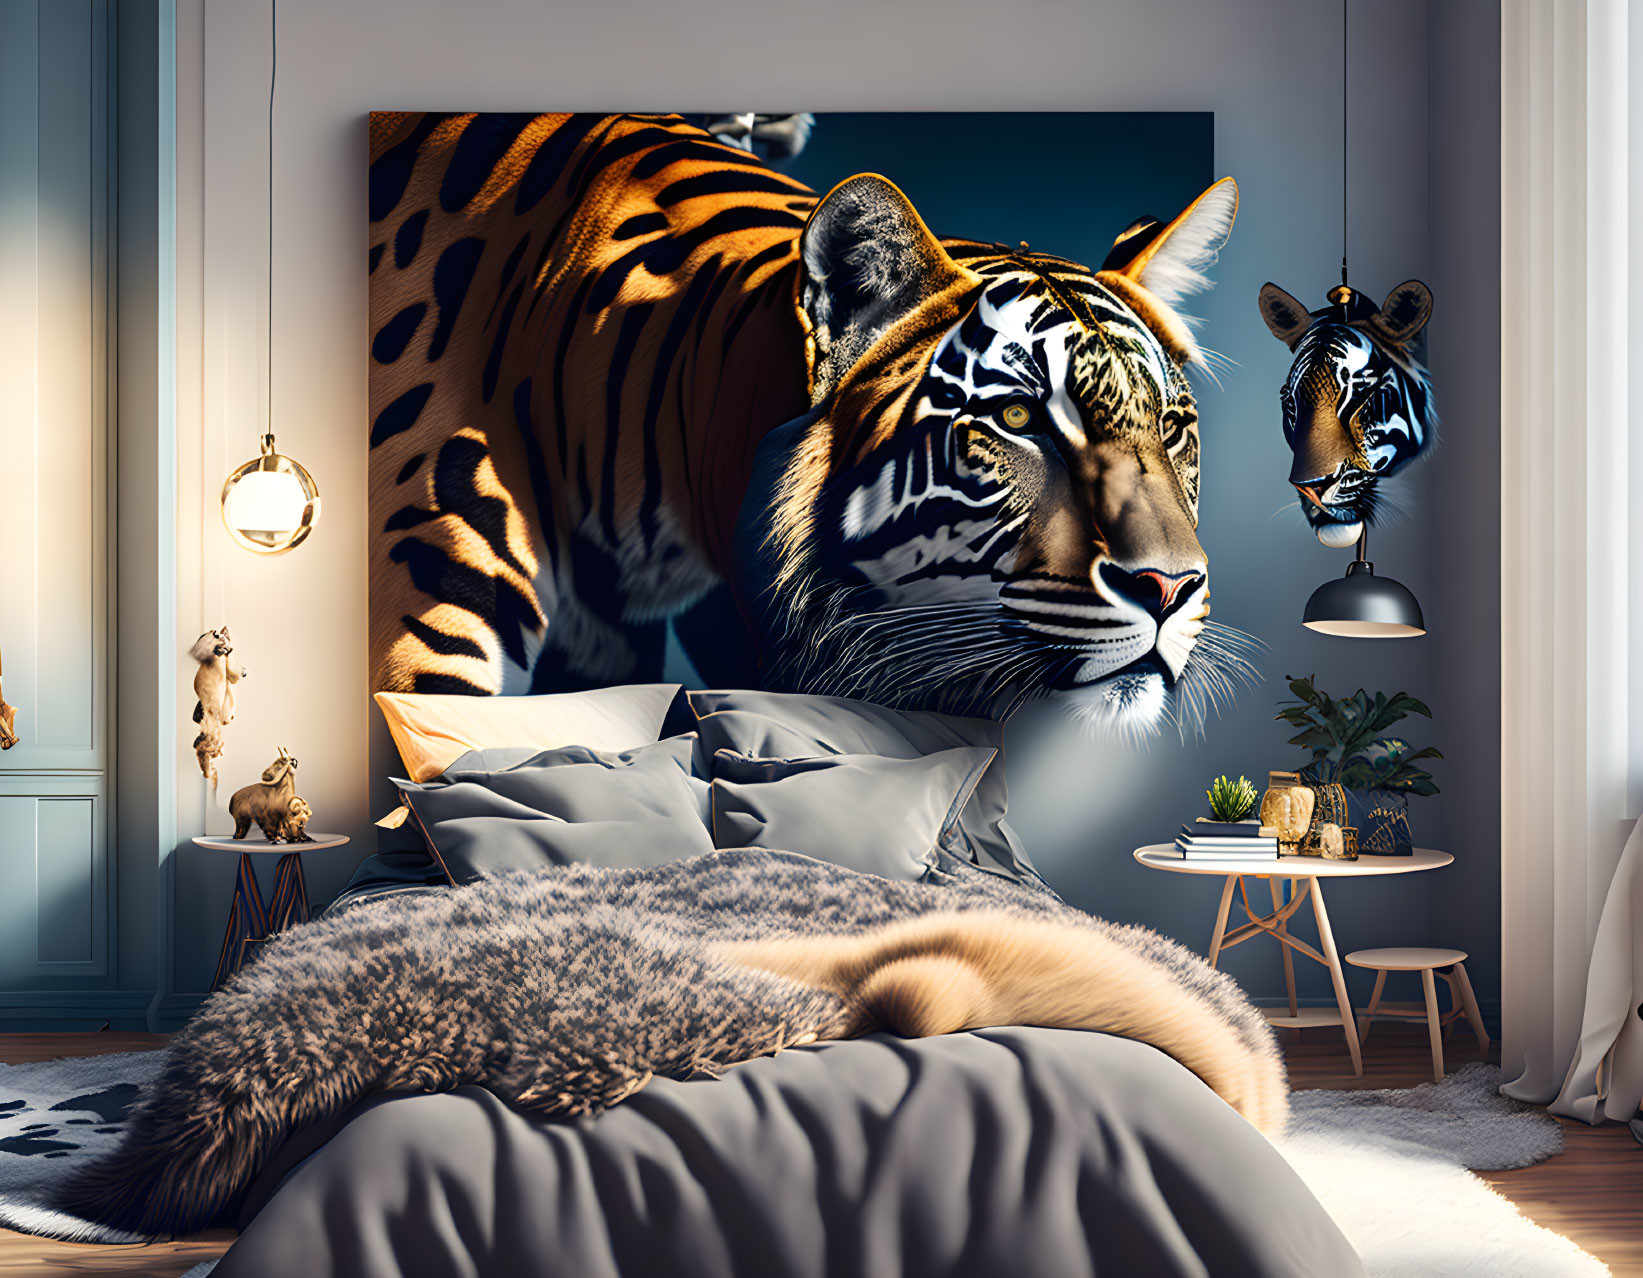 Stylish Bedroom with Tiger-Themed Wall Art & Plush Bedding